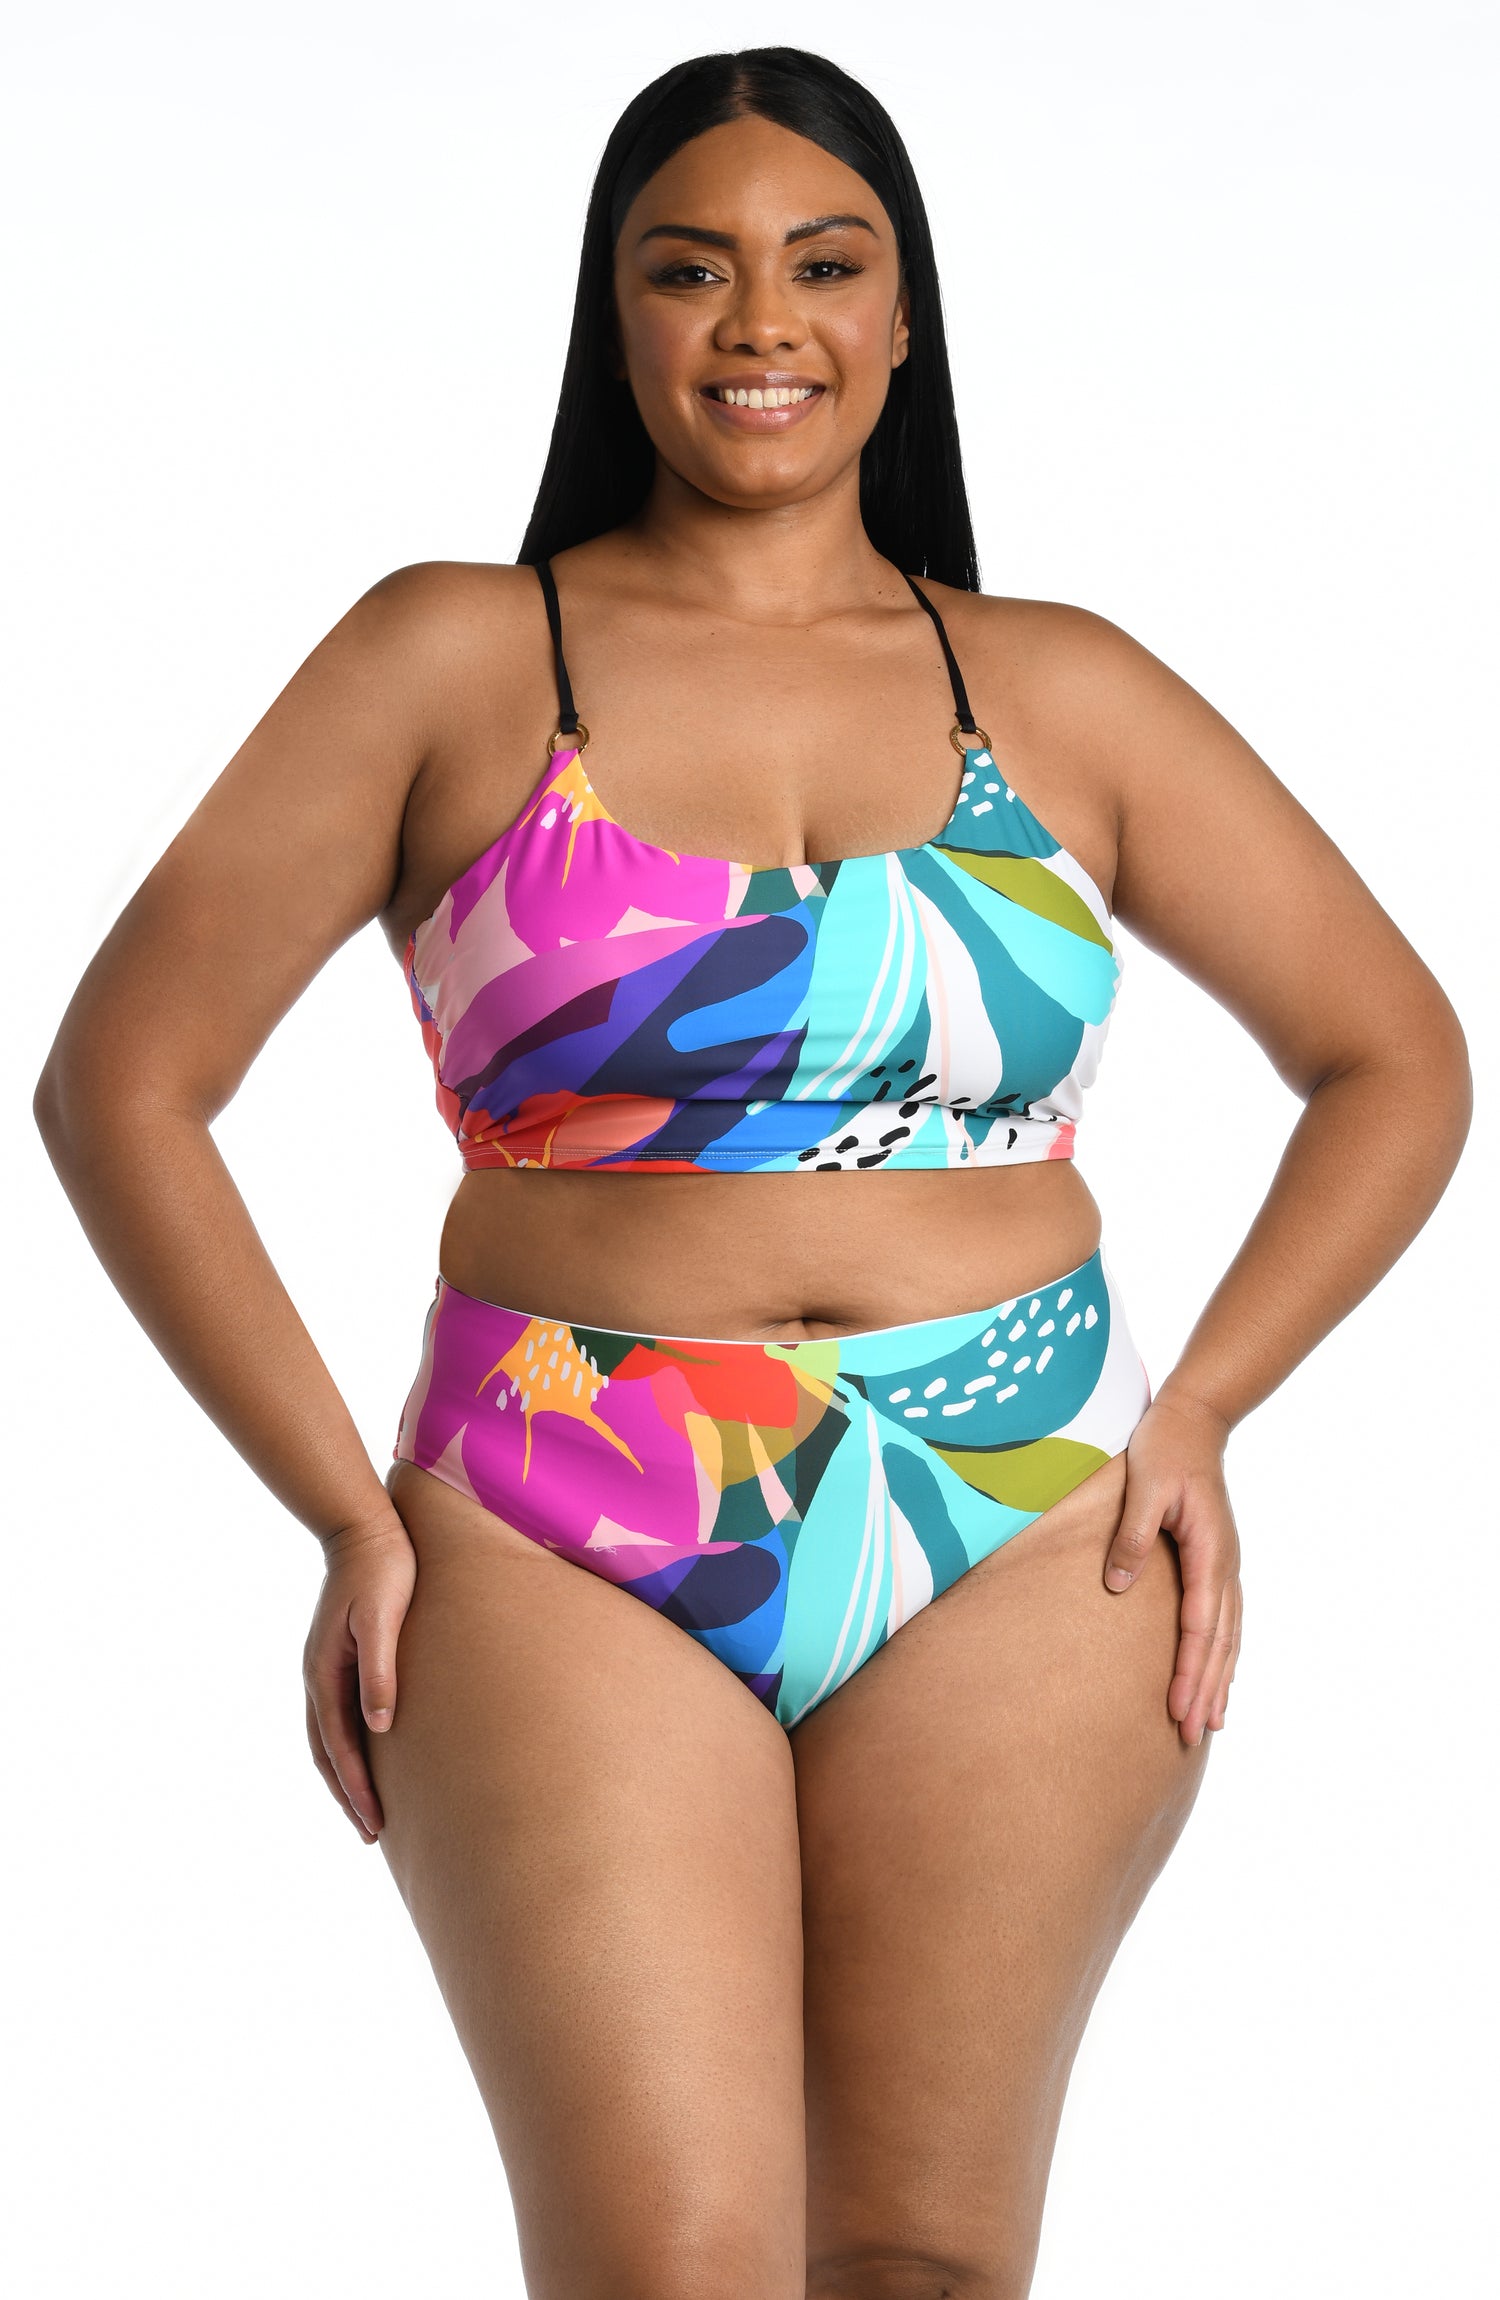 Model is wearing a multi colored tropical printed midkini swimsuit top from our Eclectic Shore collection.